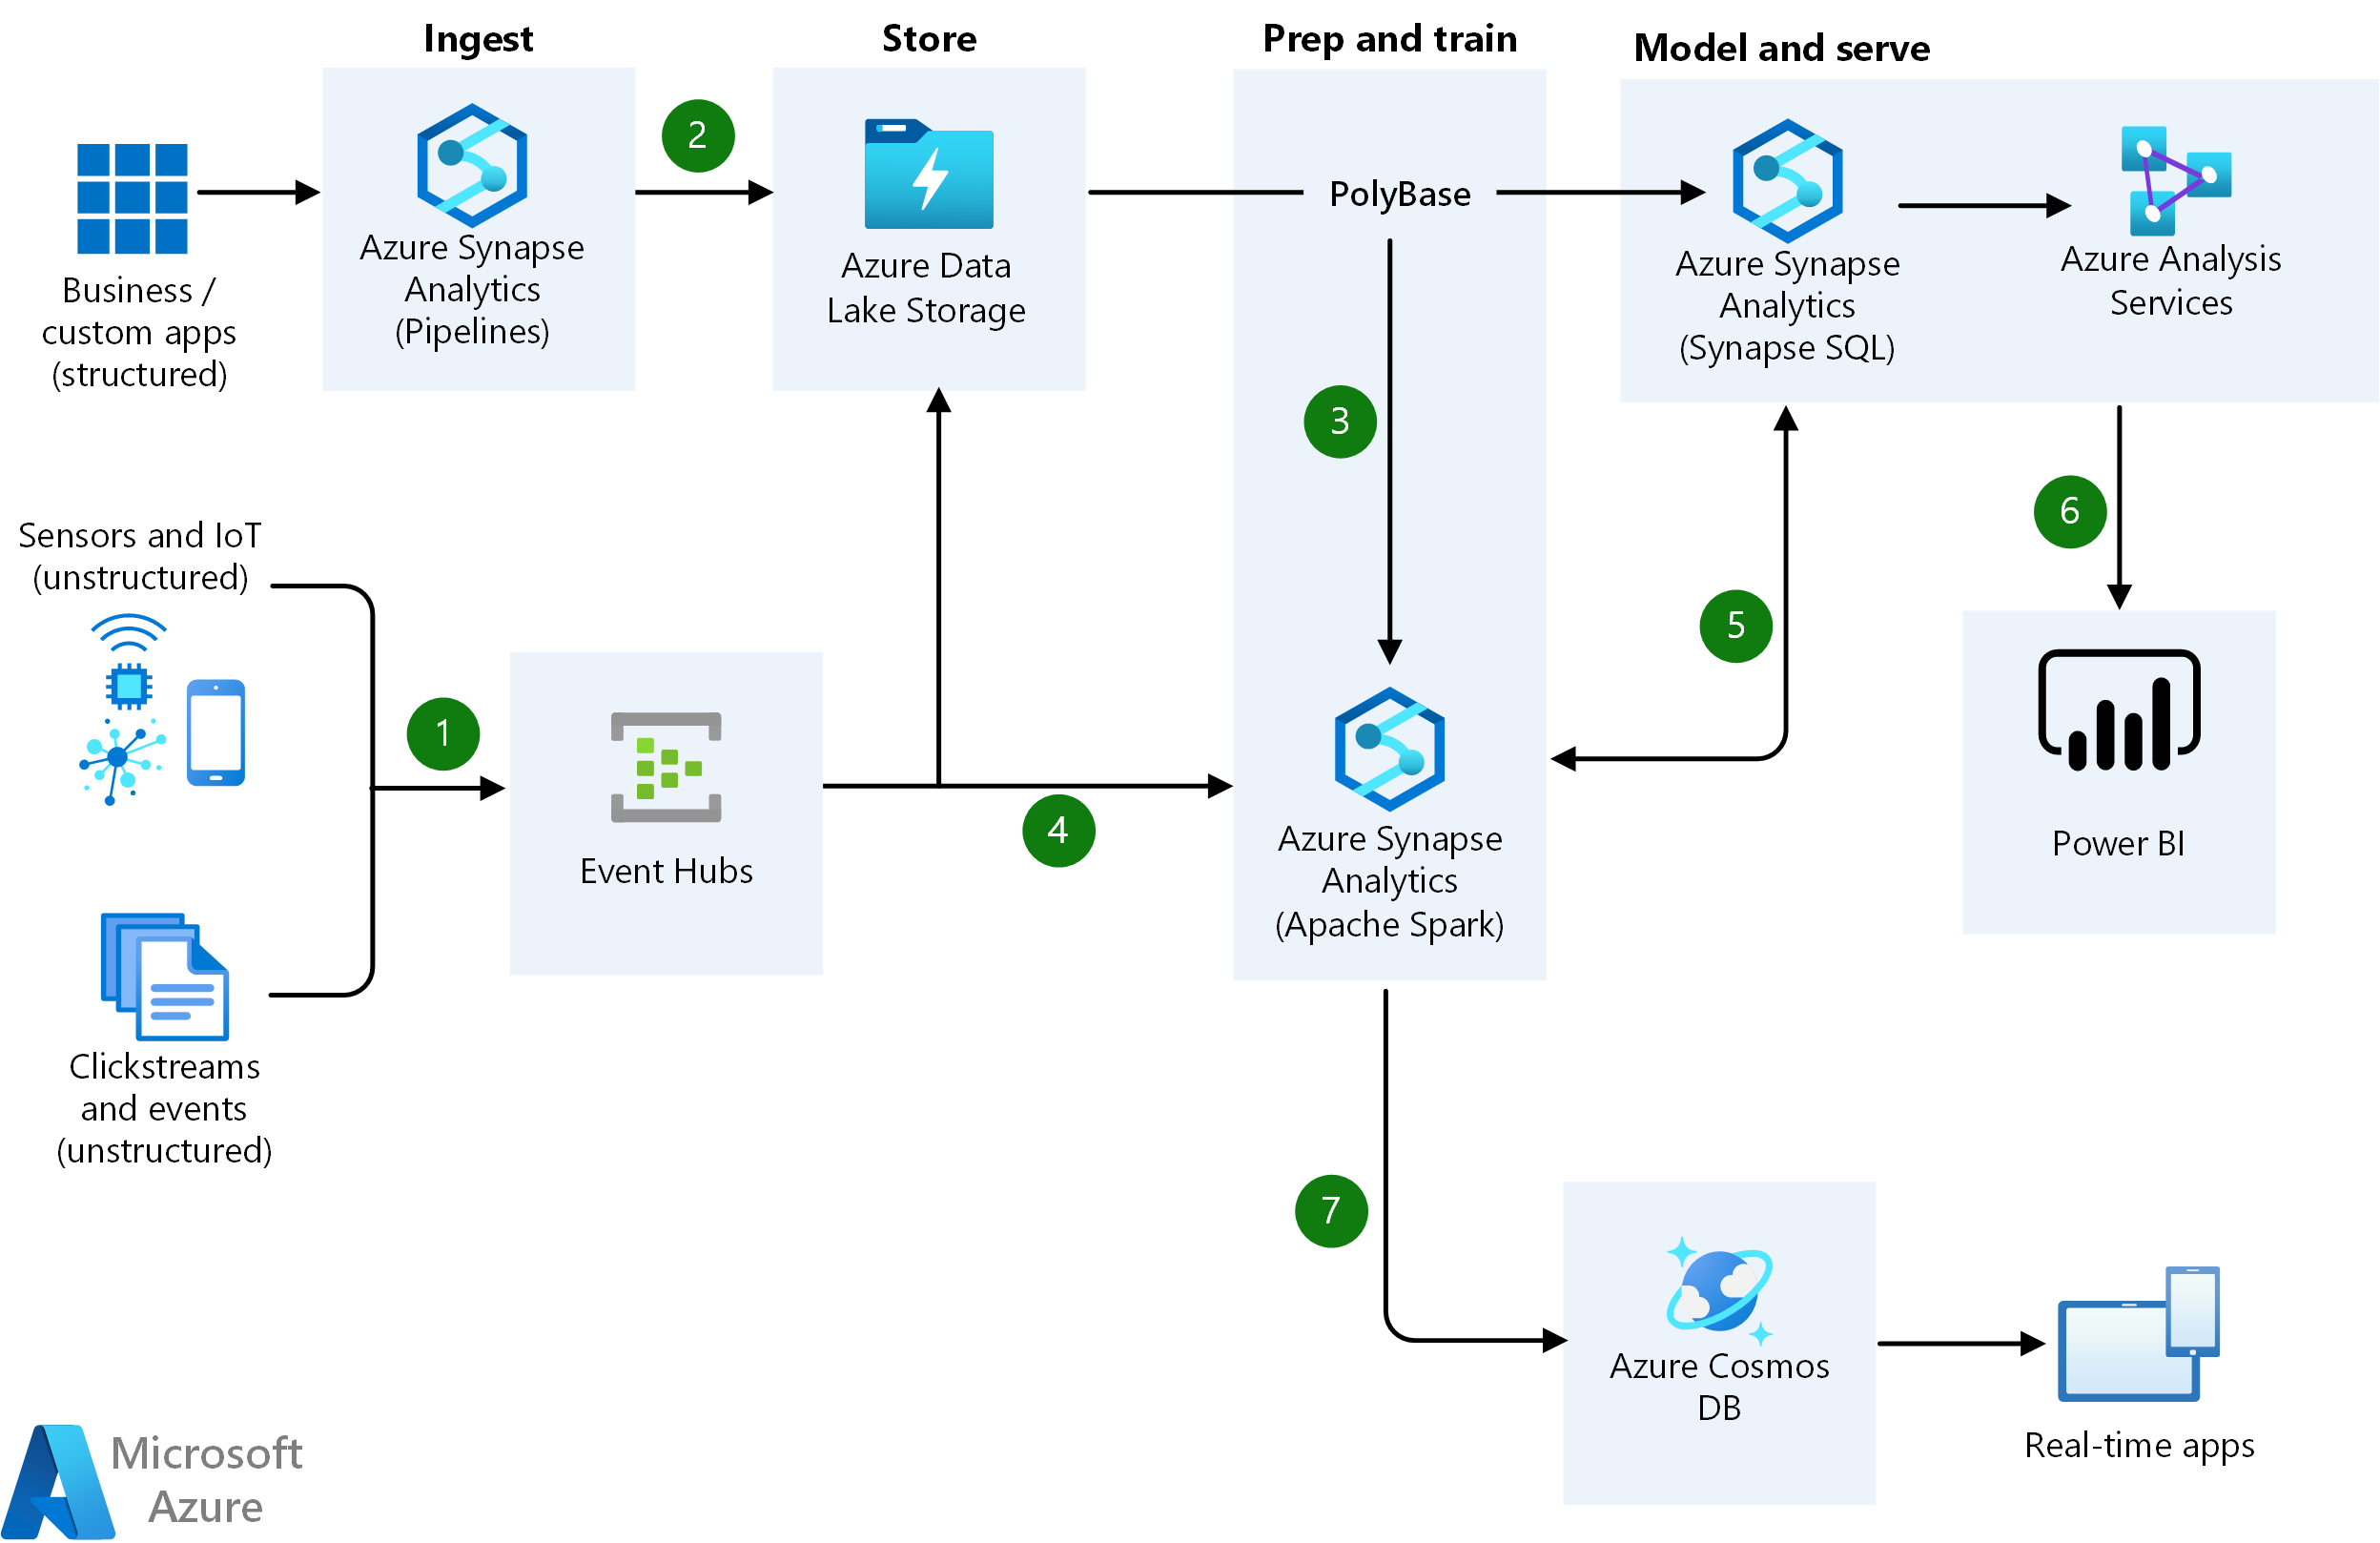 Diagram of a real-time analytics solution on big data architecture using Azure Synapse Analytics with Azure Data Lake Storage Gen2, Event Hubs, Azure Analysis Services, Azure Cosmos DB, and Power BI.